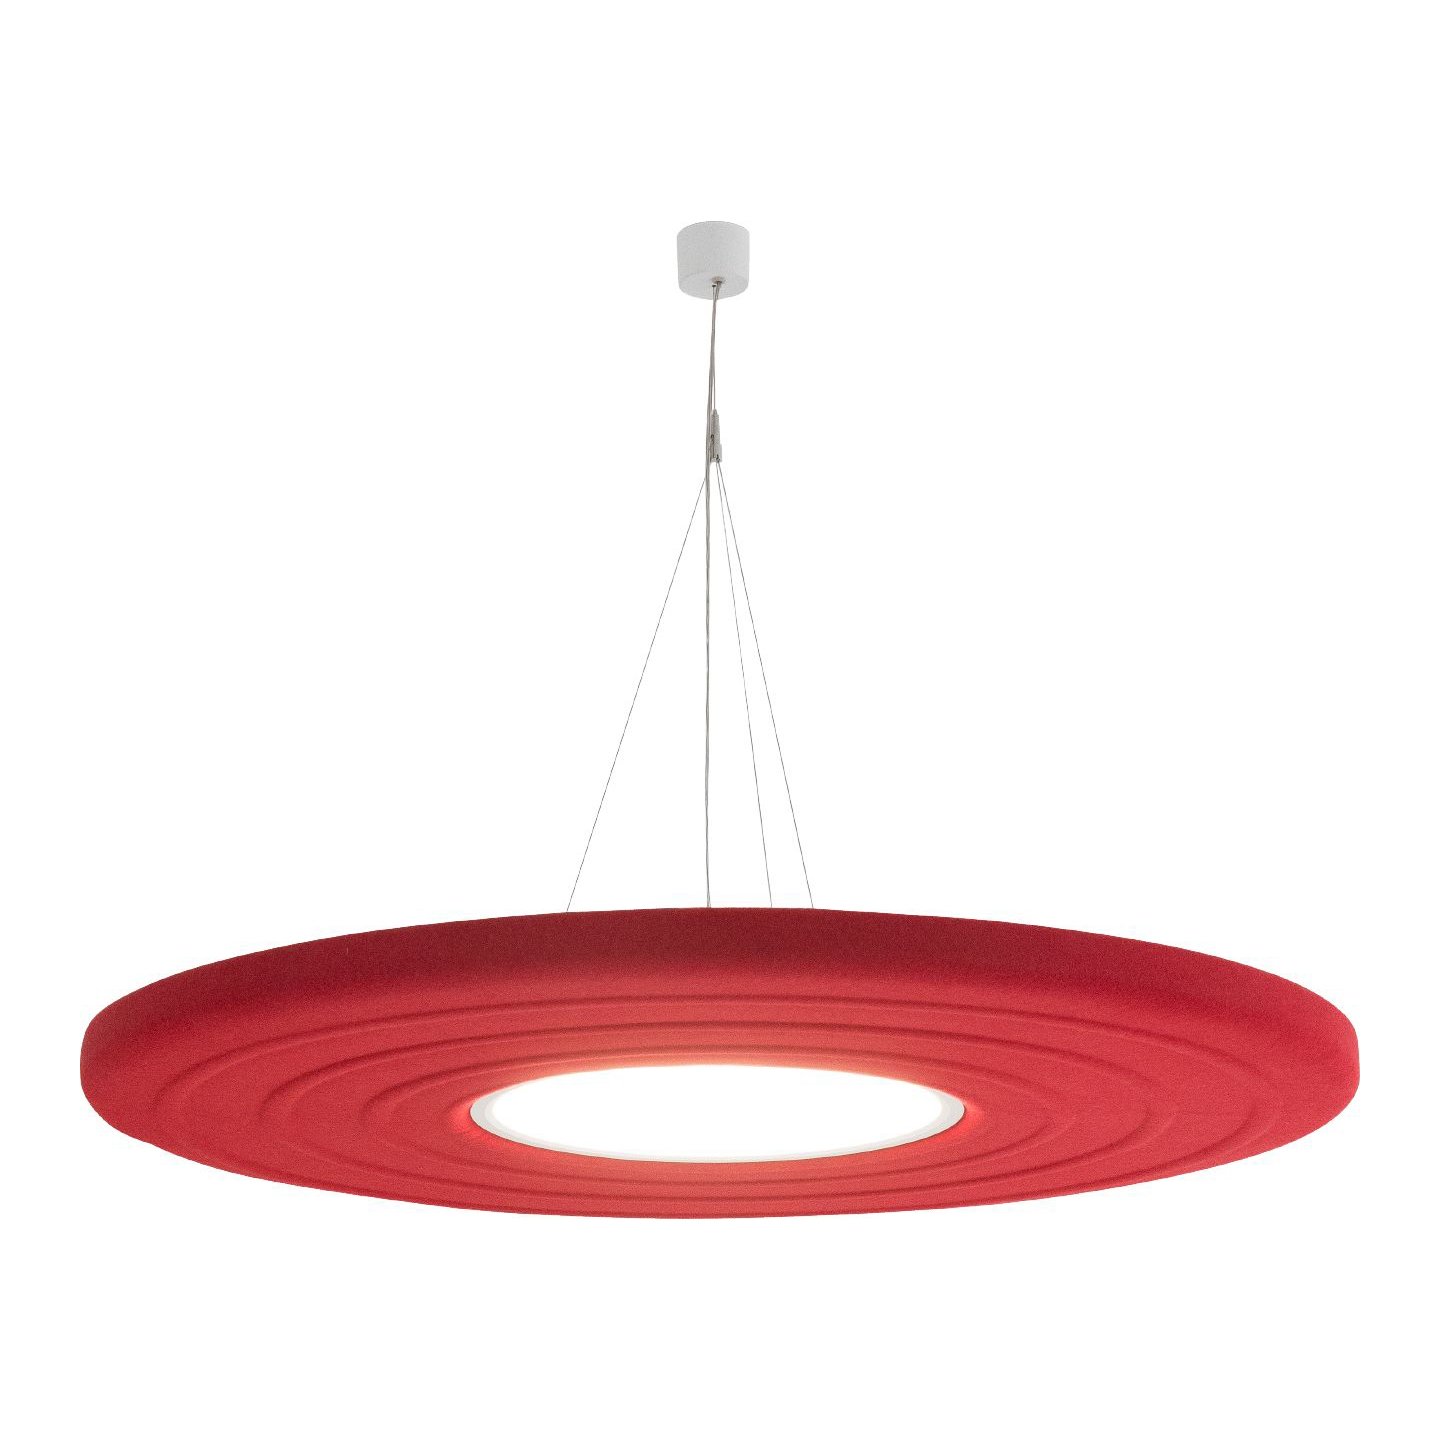 Haworth Buzzimoon Lighting in a red color in the shape of a disc